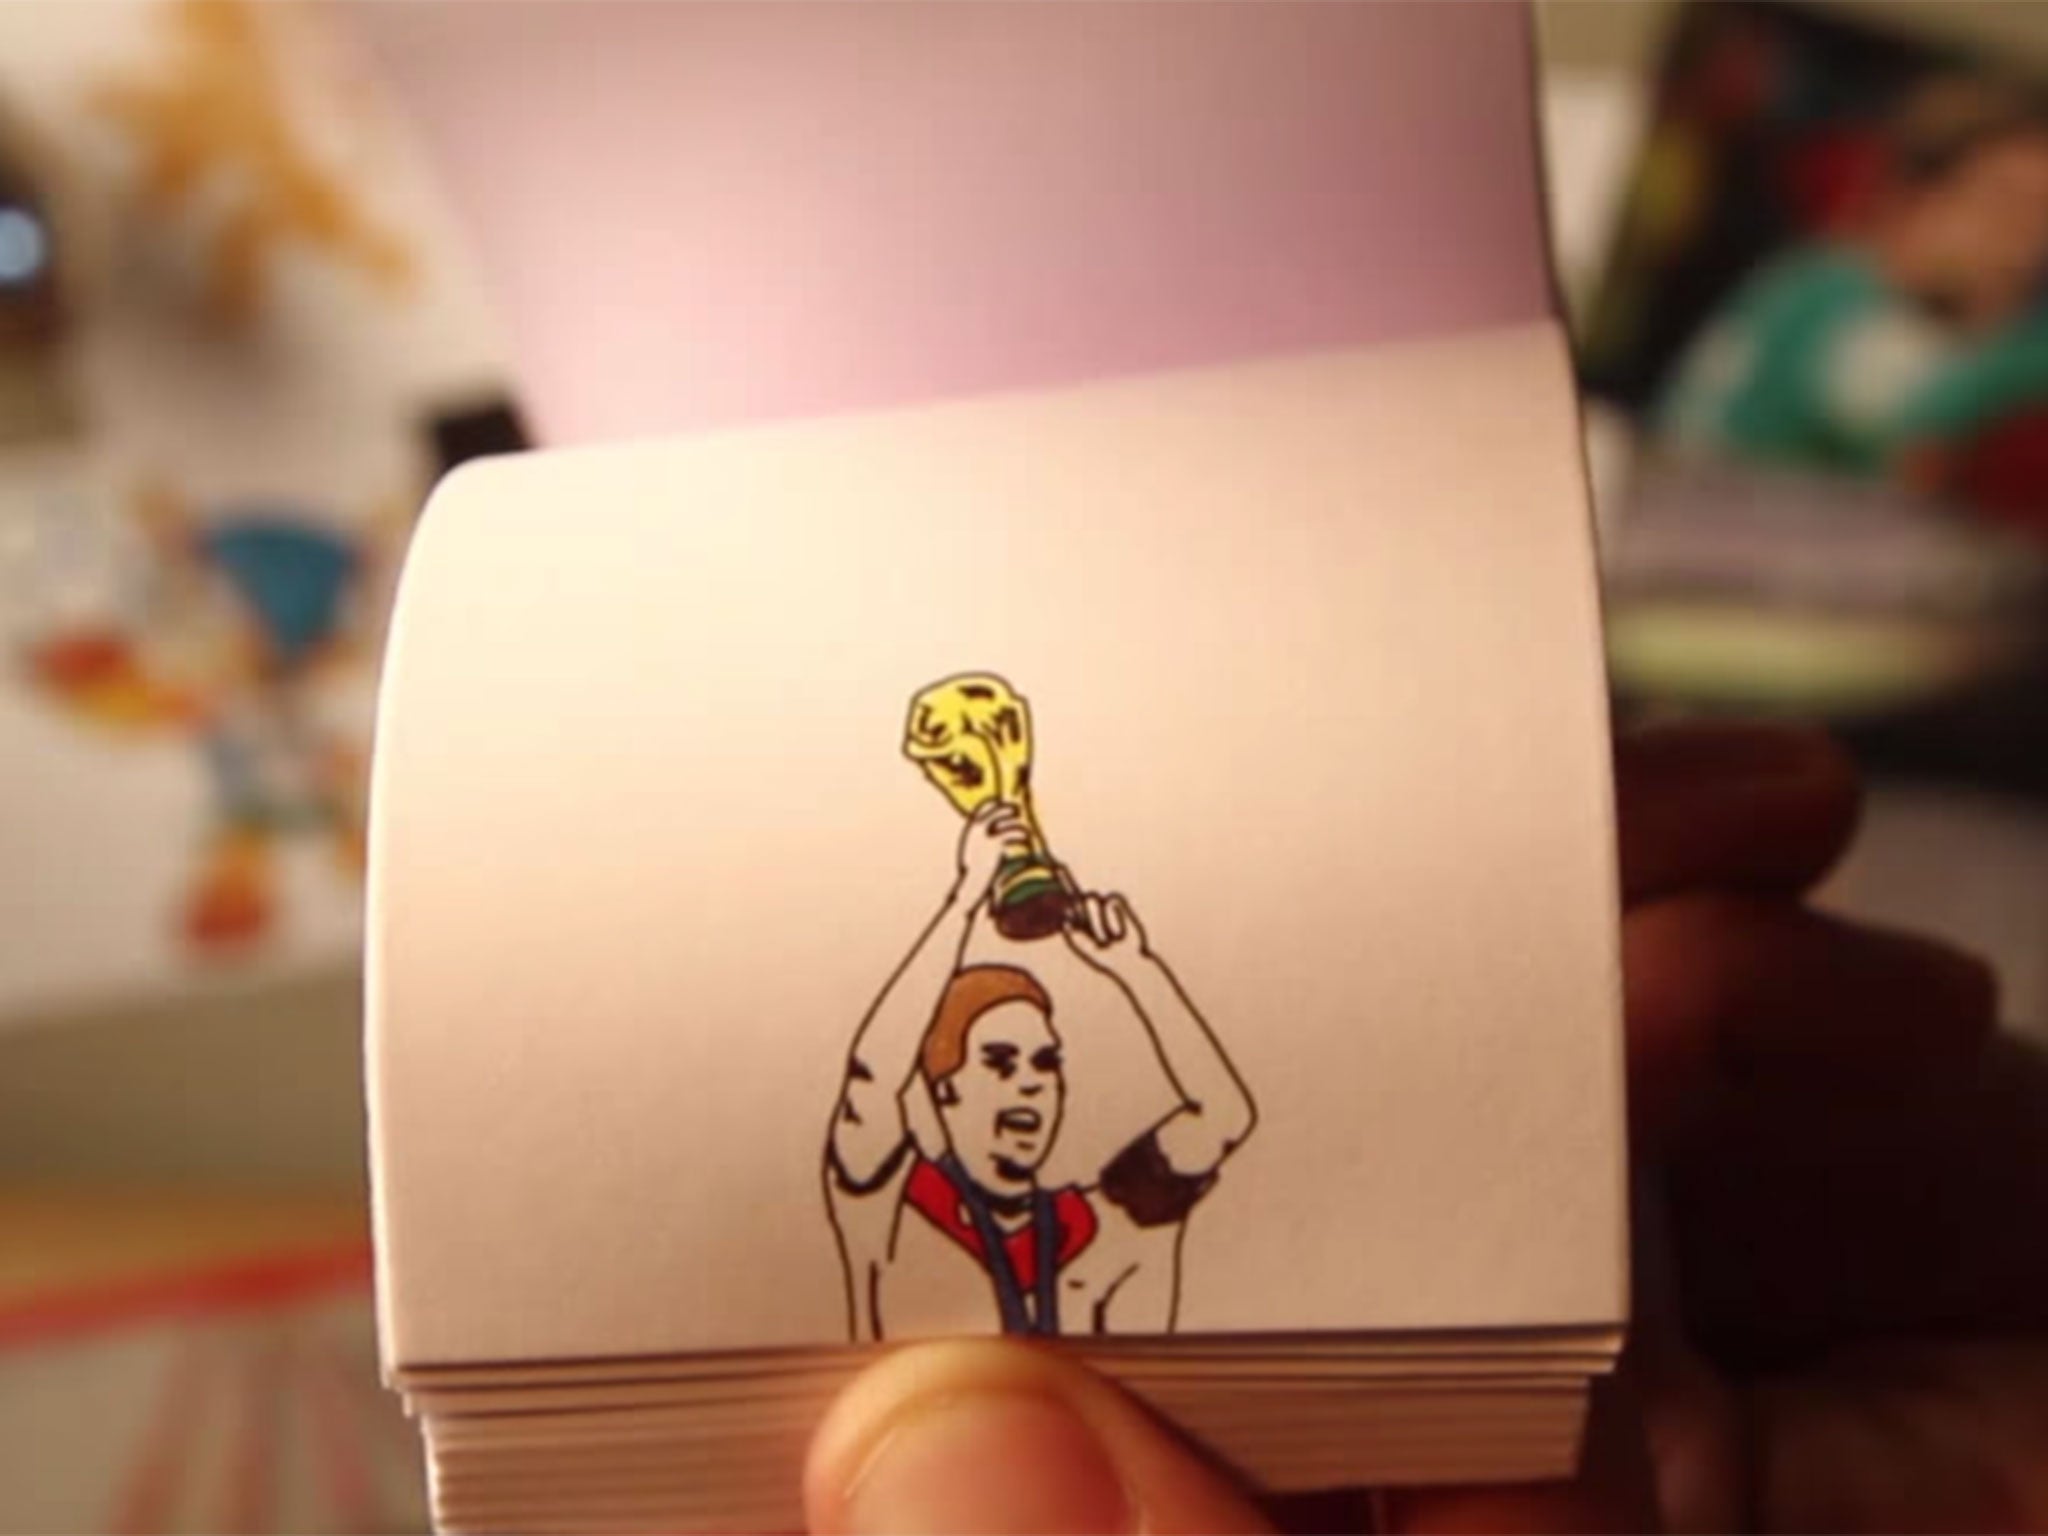 The German pen maker Stabilo has celebrated the 2014 World Cup by creating a flip book of the best goals from the tournament.